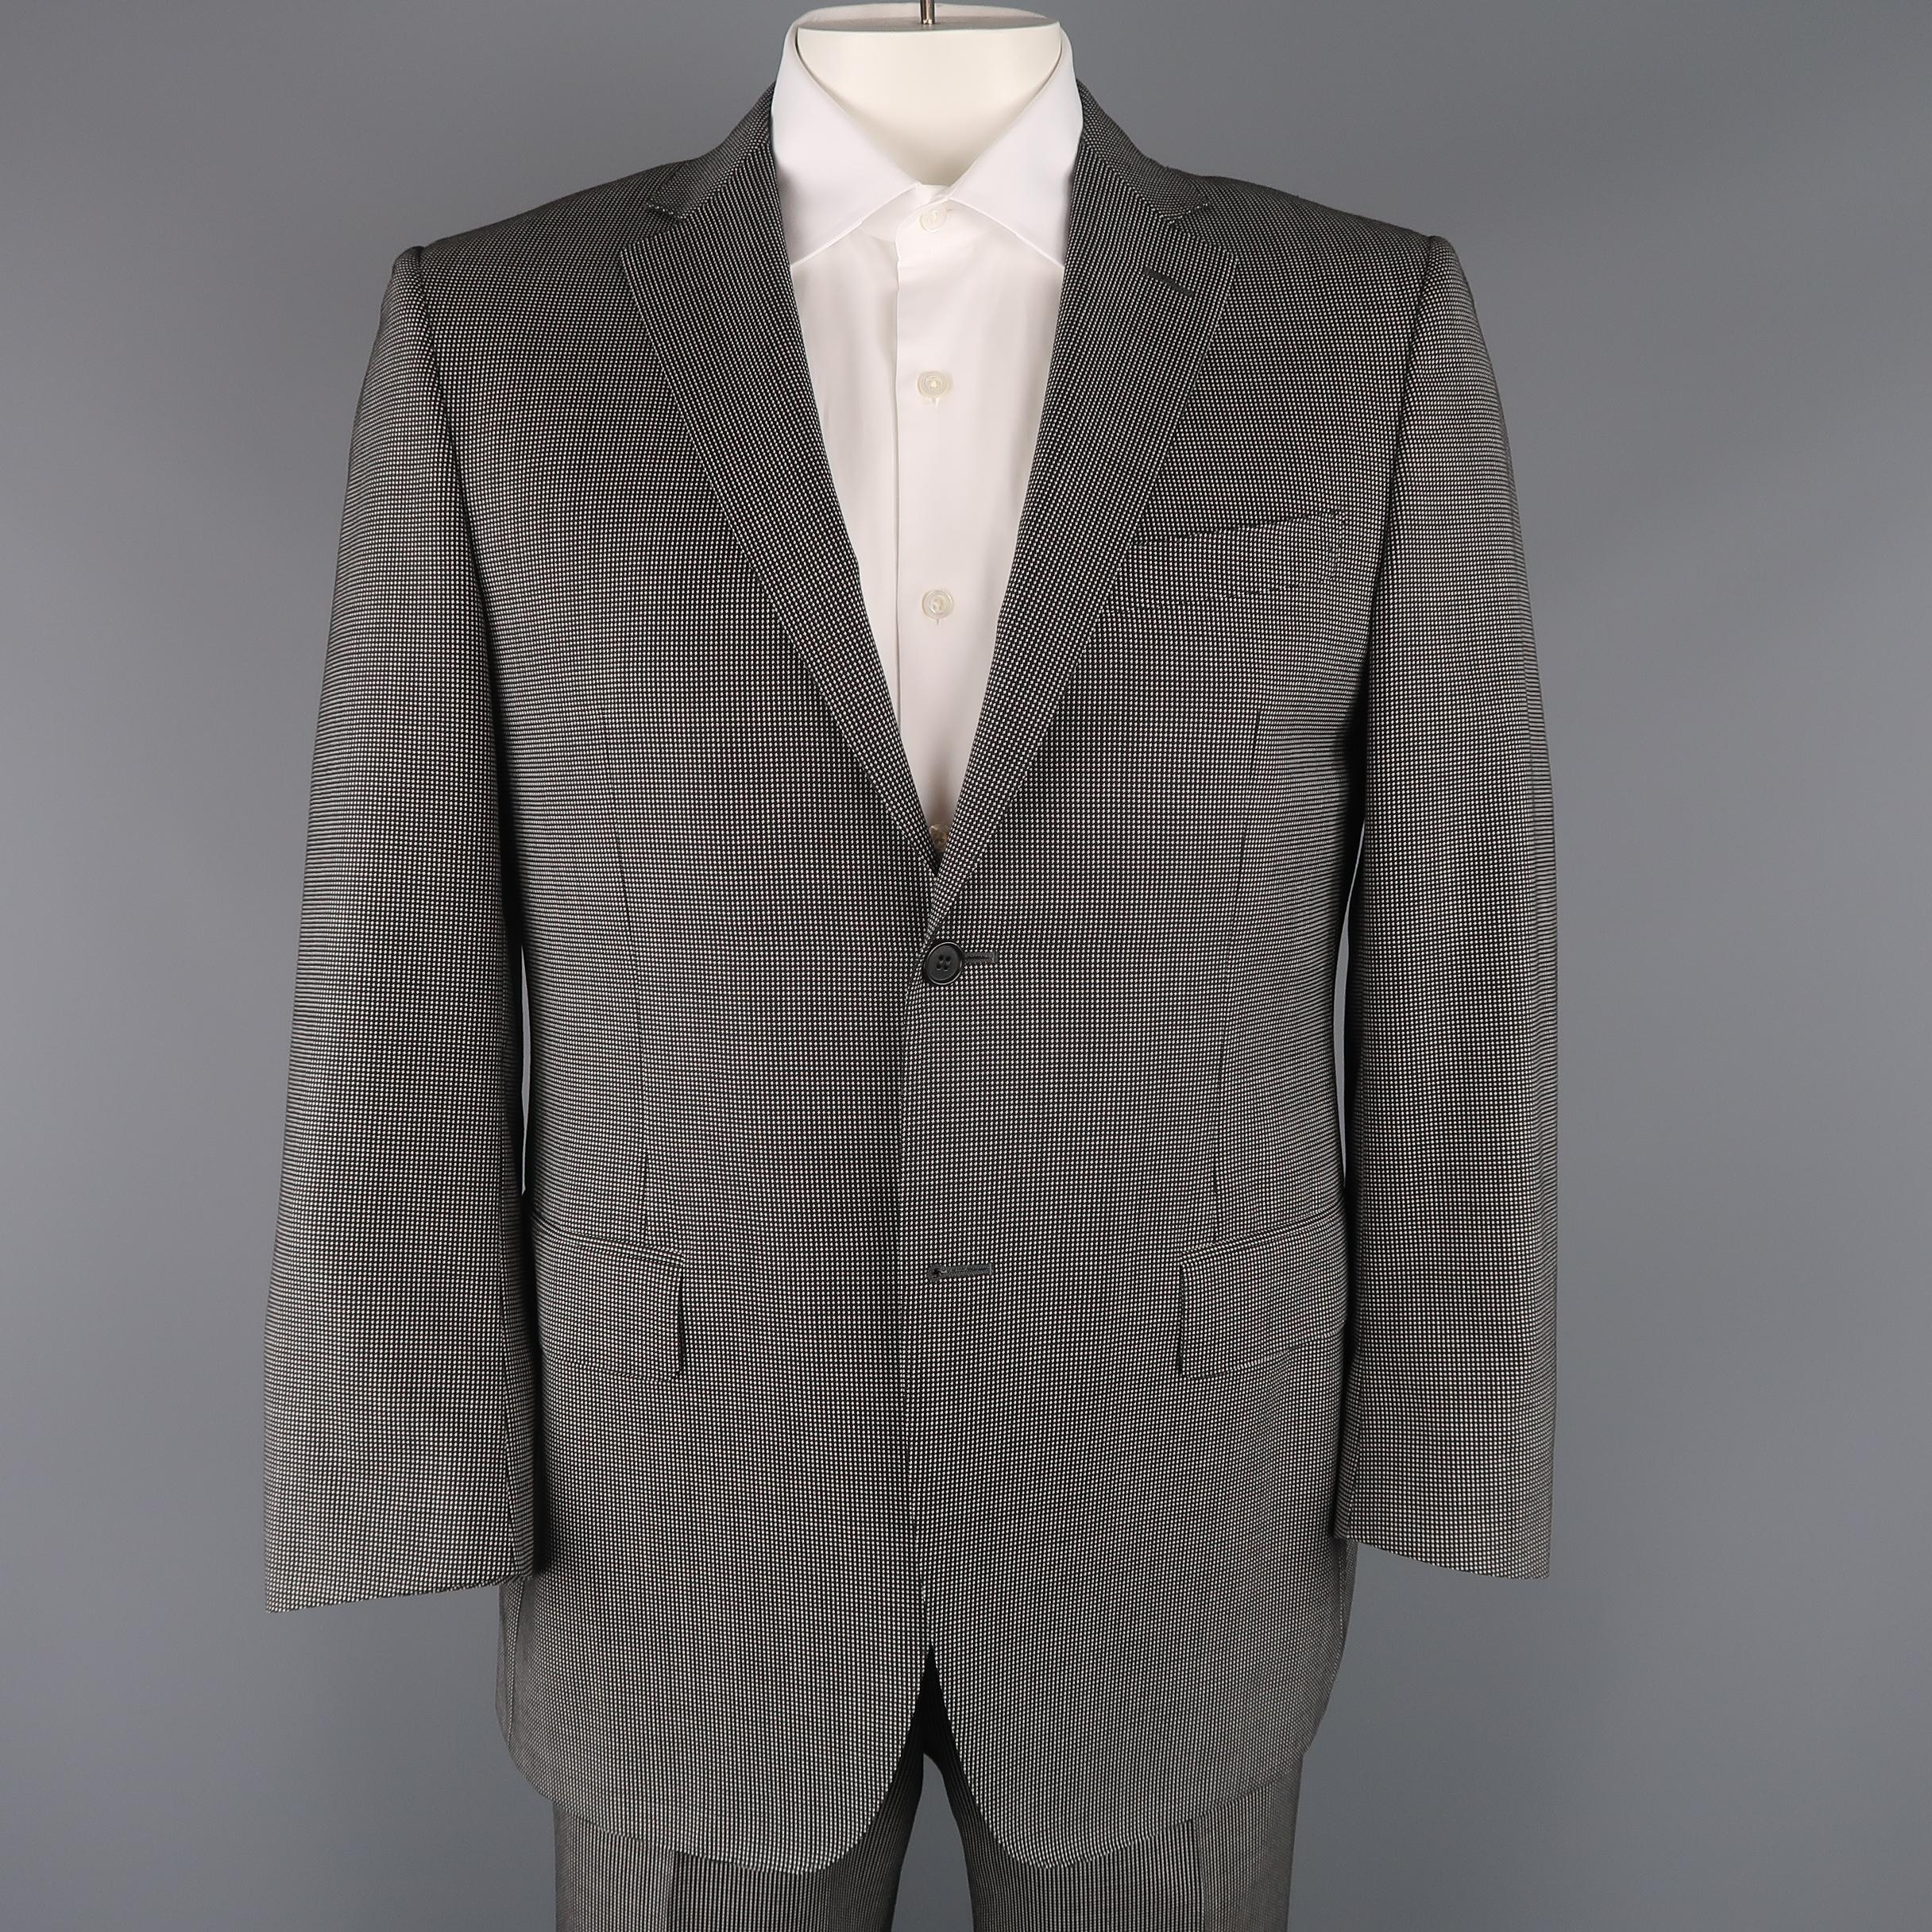 Two piece CANALI suit come sin black and white Nailhead pattern wool and includes a single breasted, two button sport coat with notch lapel, and matching flat front trousers. Made in Italy.
 
Excellent Pre-Owned Condition.
Marked: IT 52
